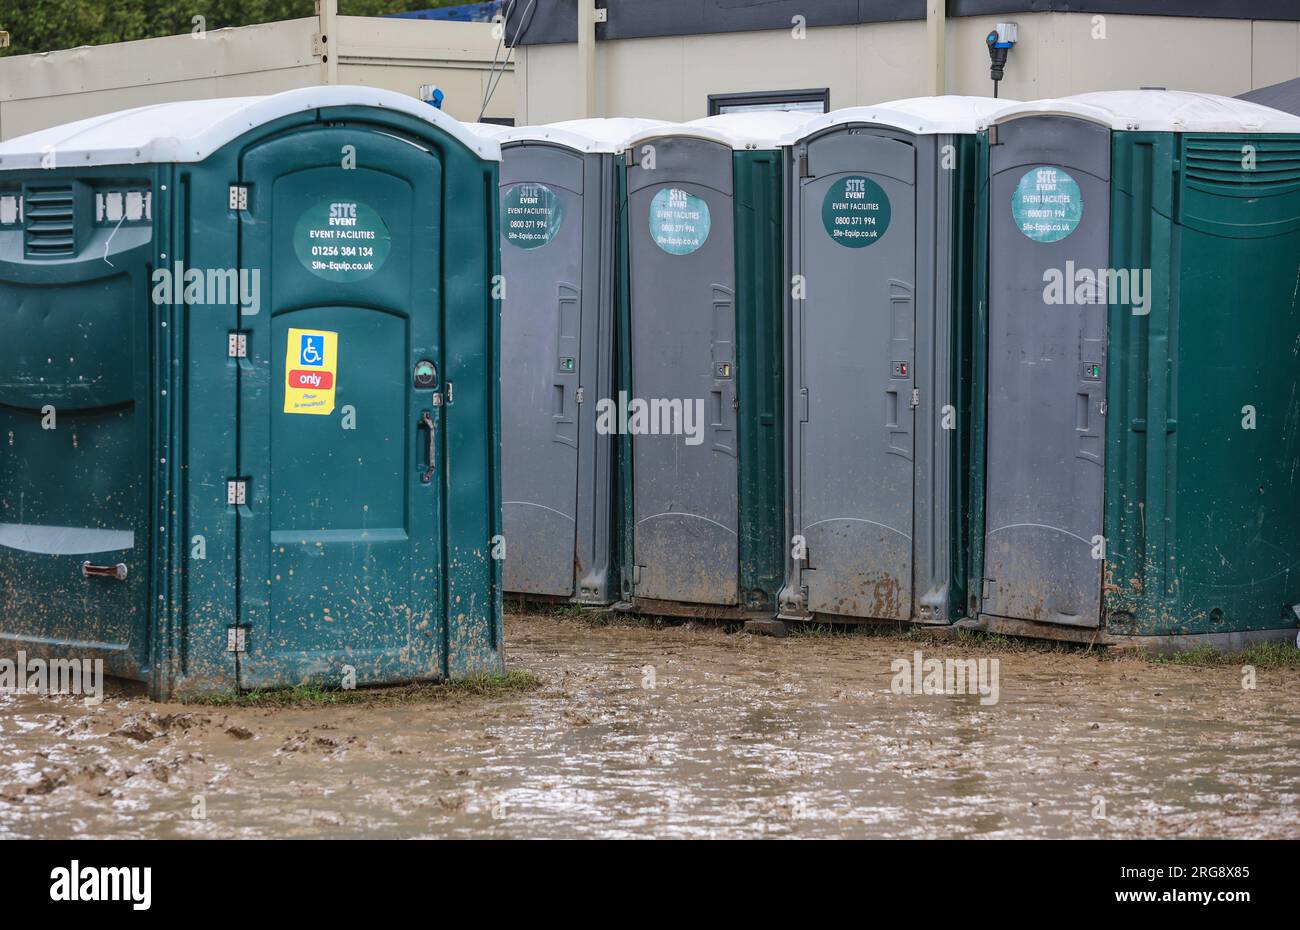 Festival toilets at a muddy festival in the UK Stock Photo